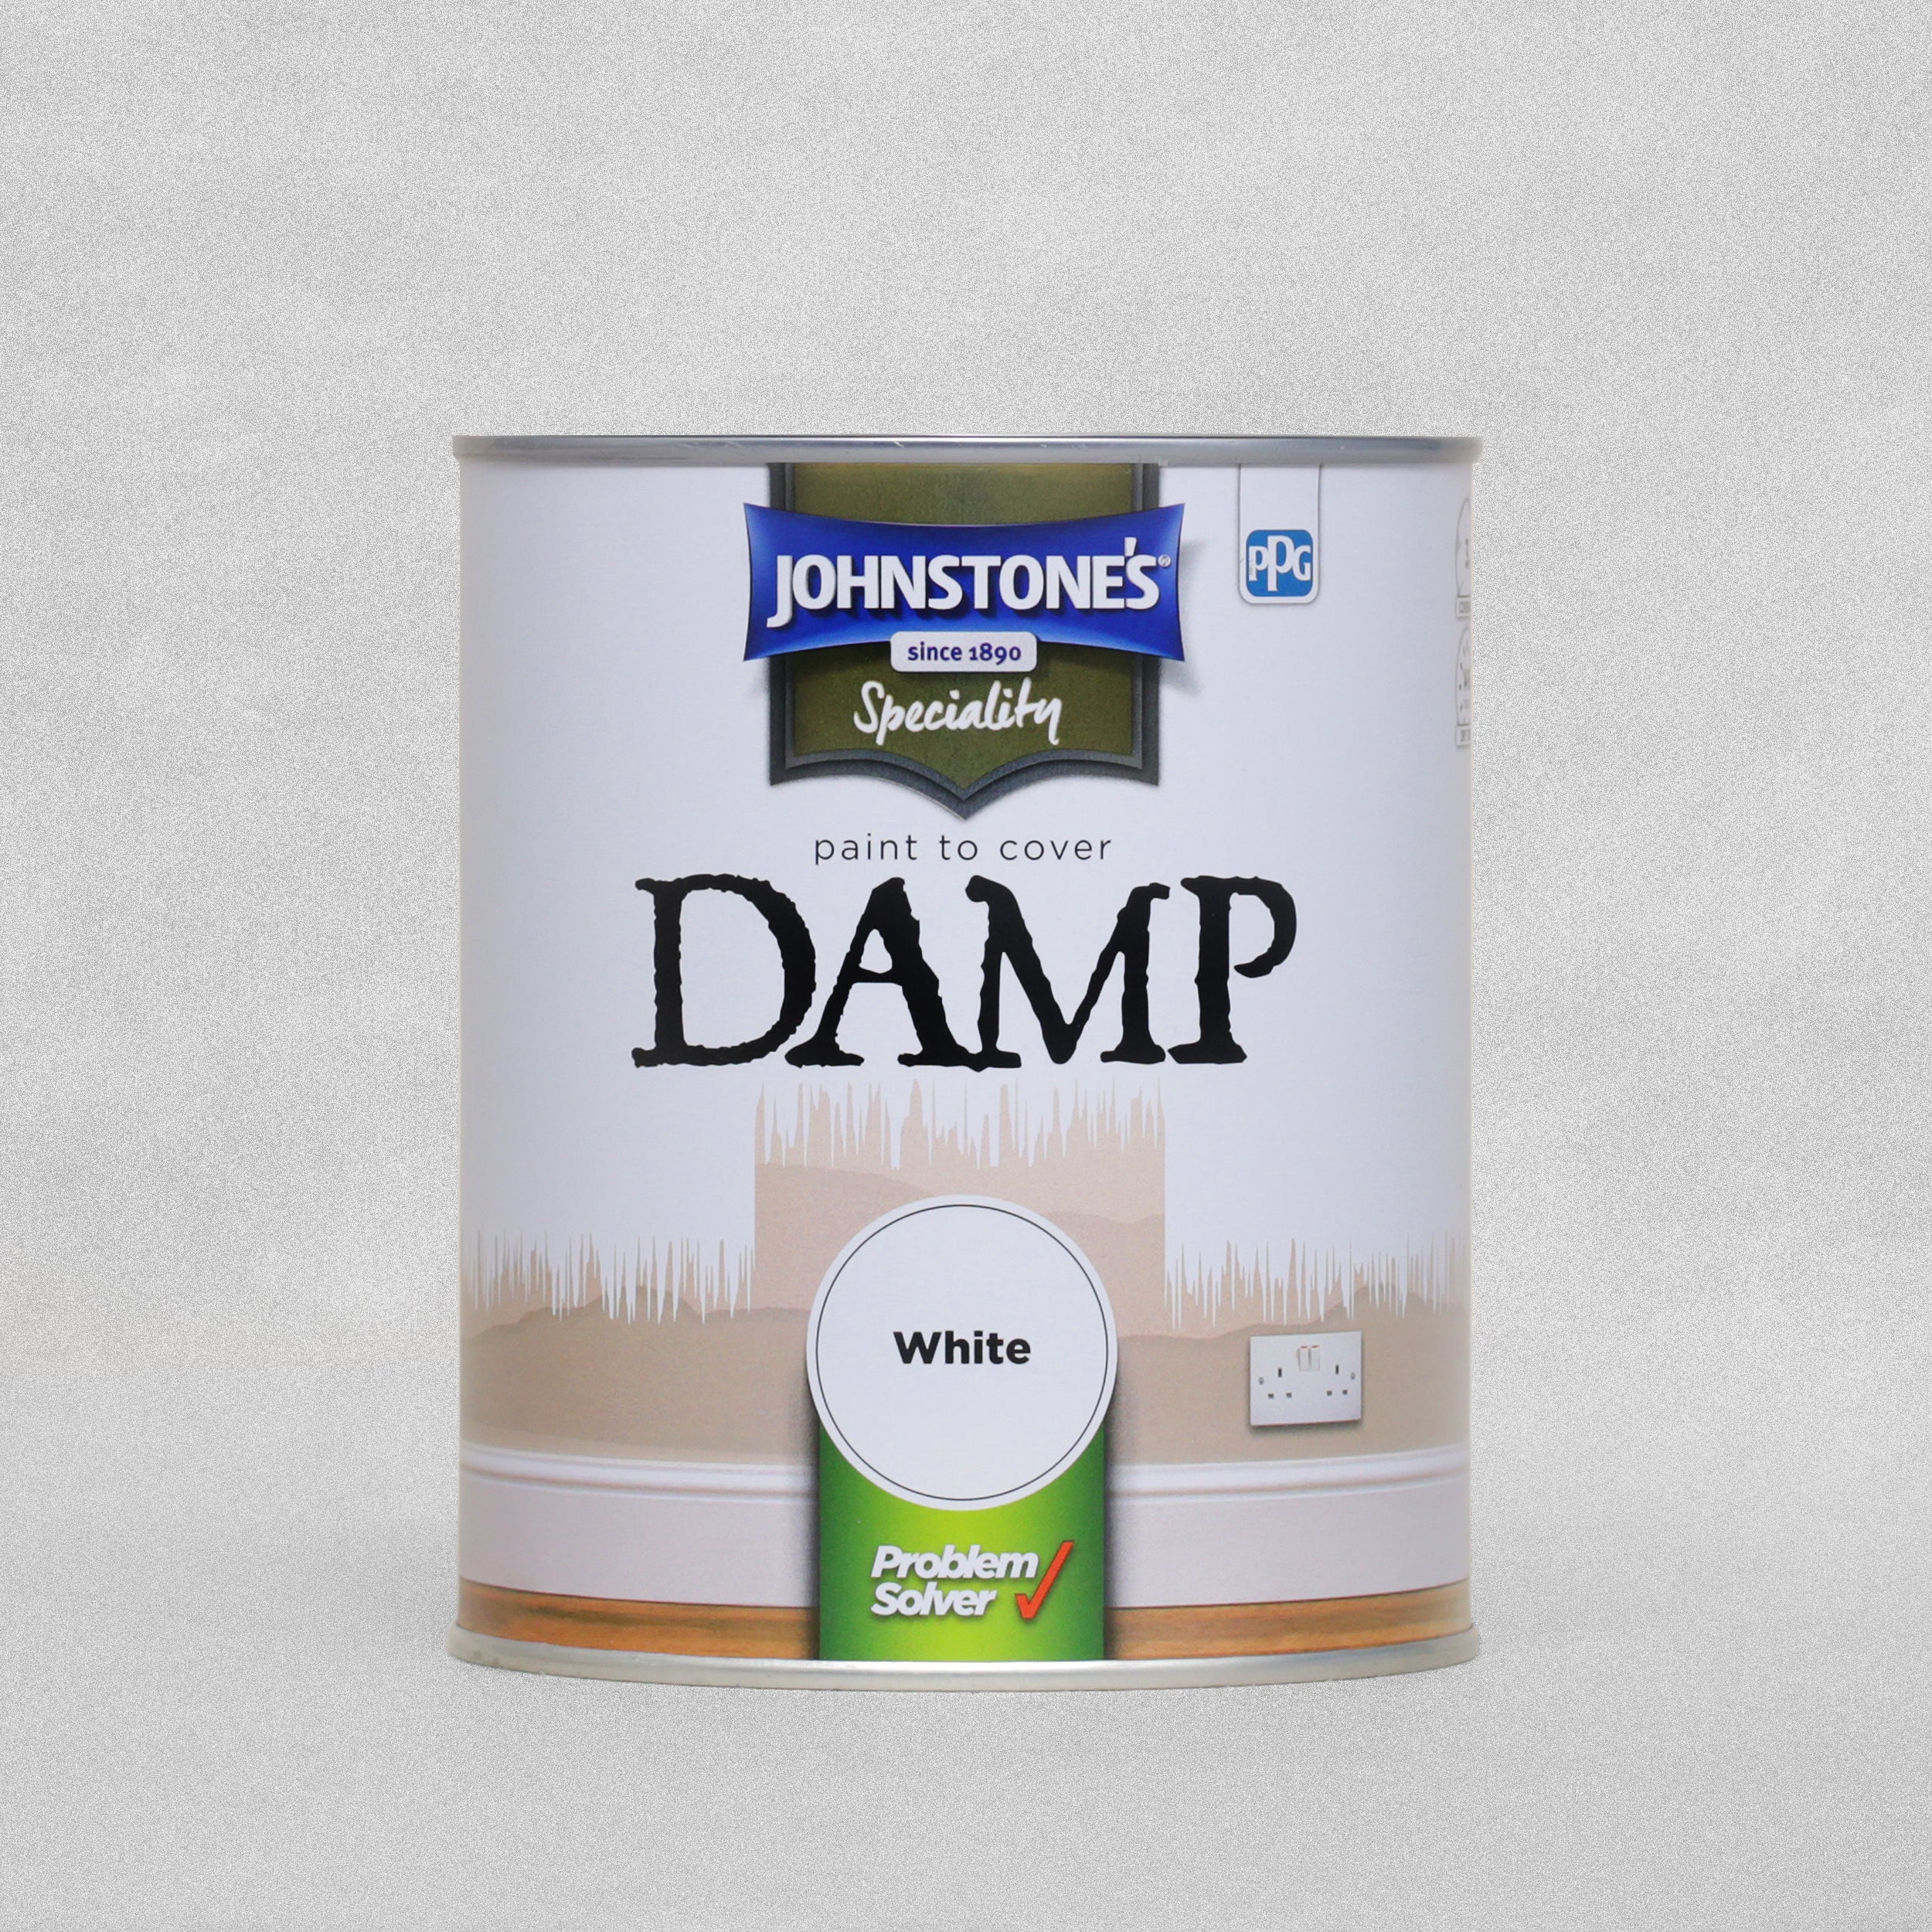 Johnstone's Speciality Damp Cover Paint White - 750ml